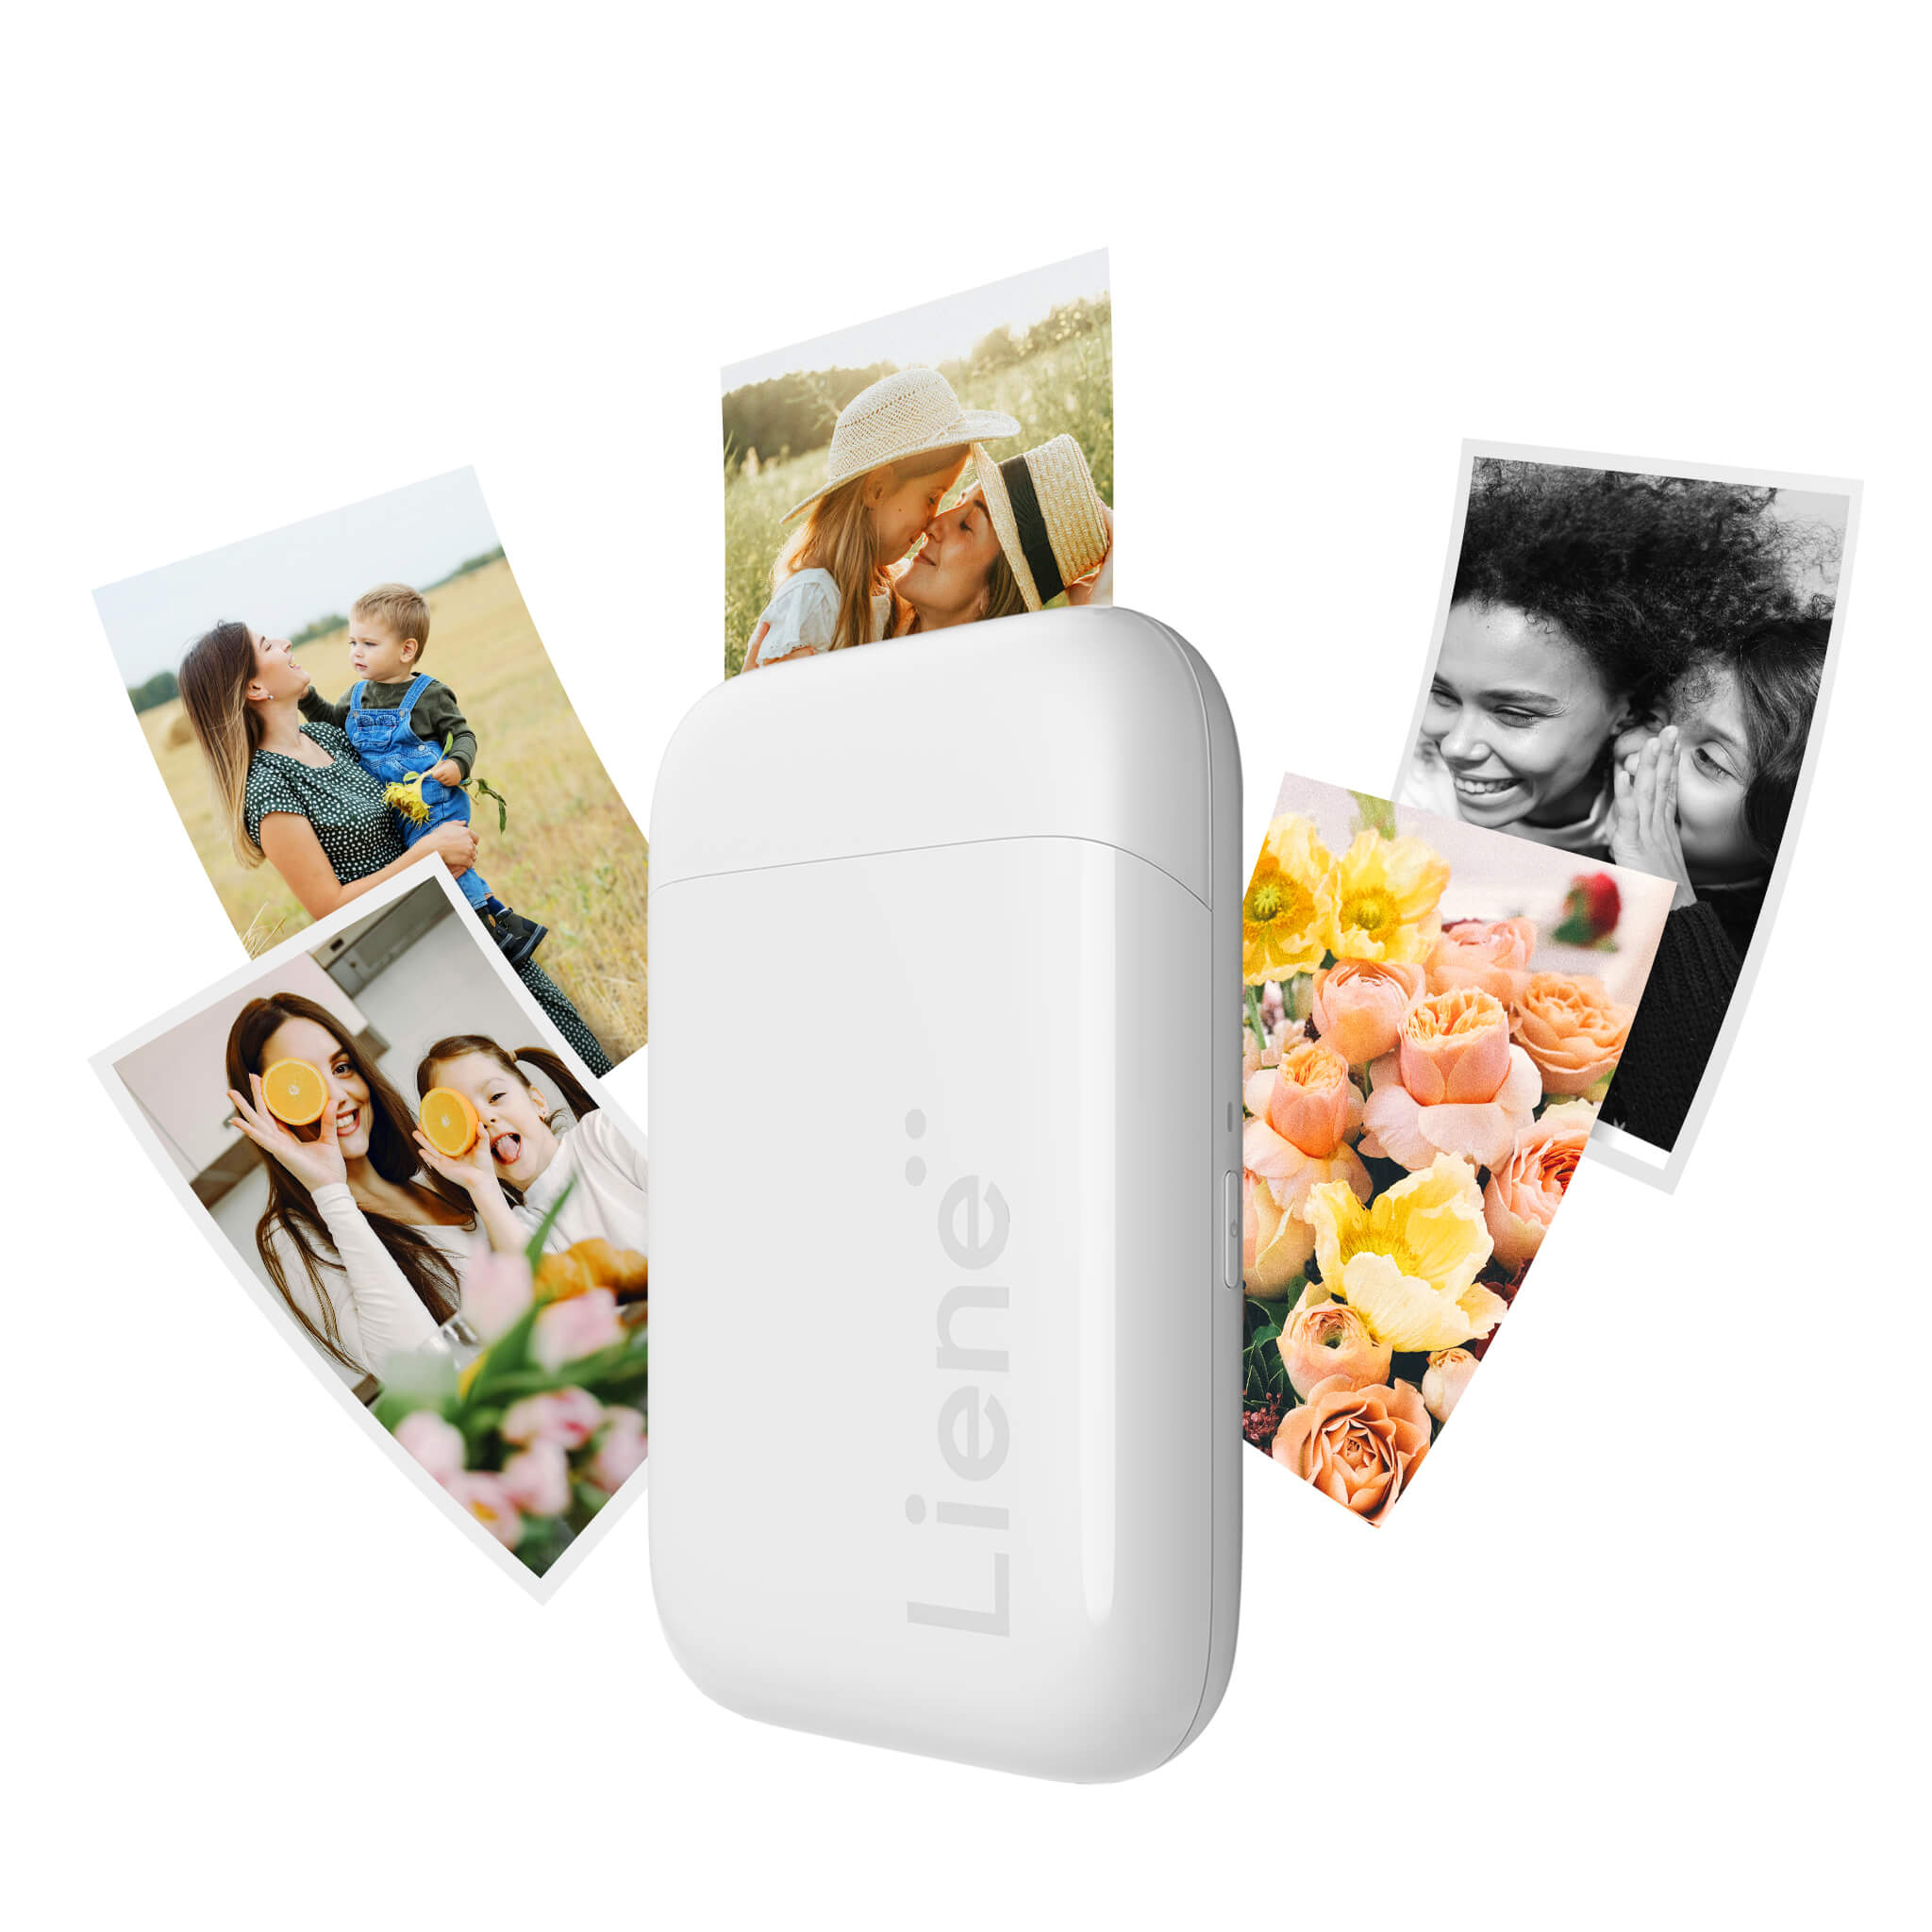 Liene Pearl K100 2x3" Portable Photo Printer - White (5 Zink Photo Papers)